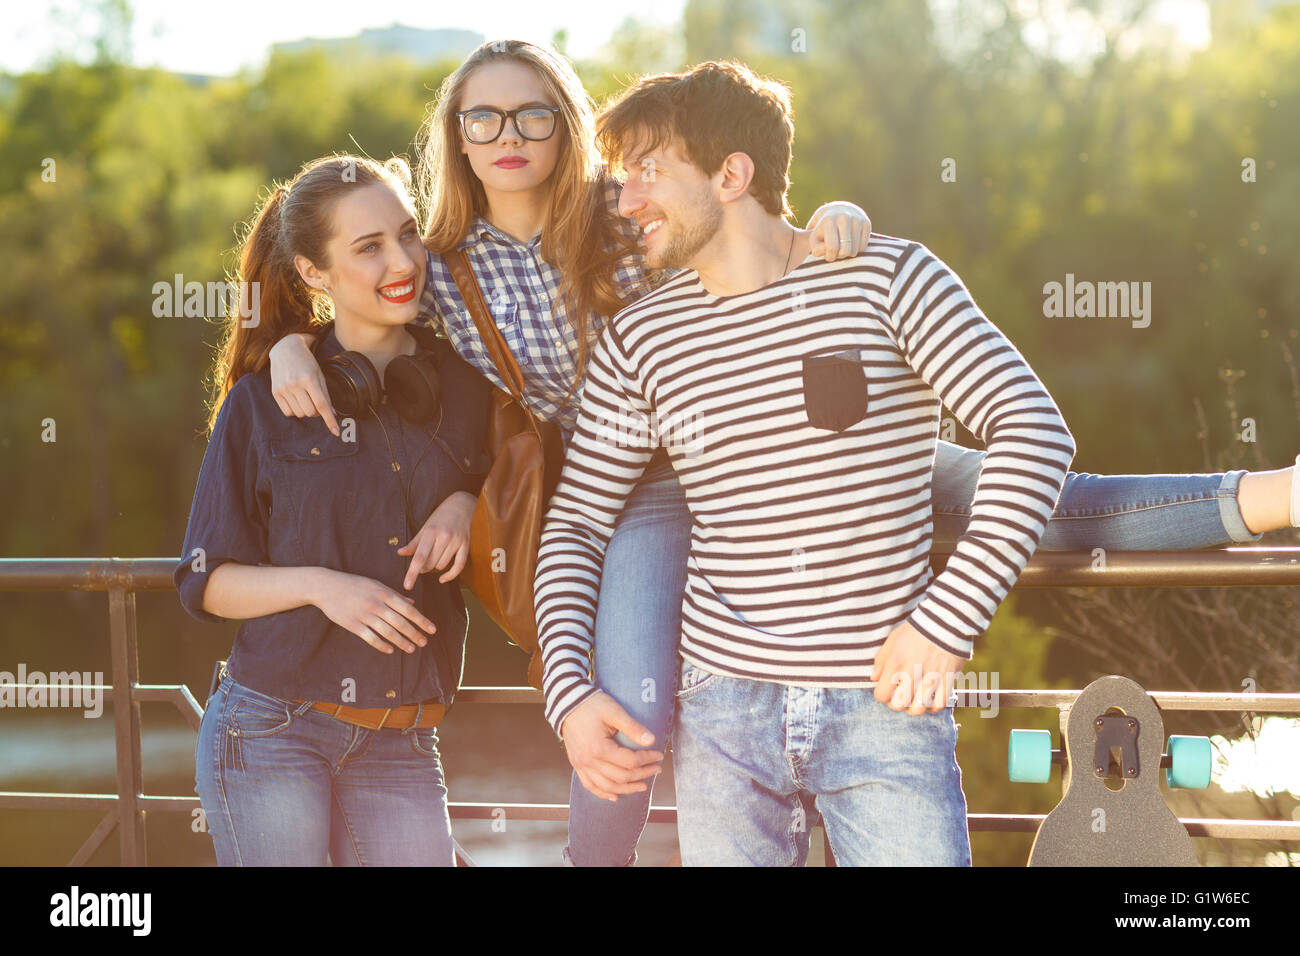 Friendship, leisure, summer, technology and people concept - smiling friends having fun outdoors Stock Photo